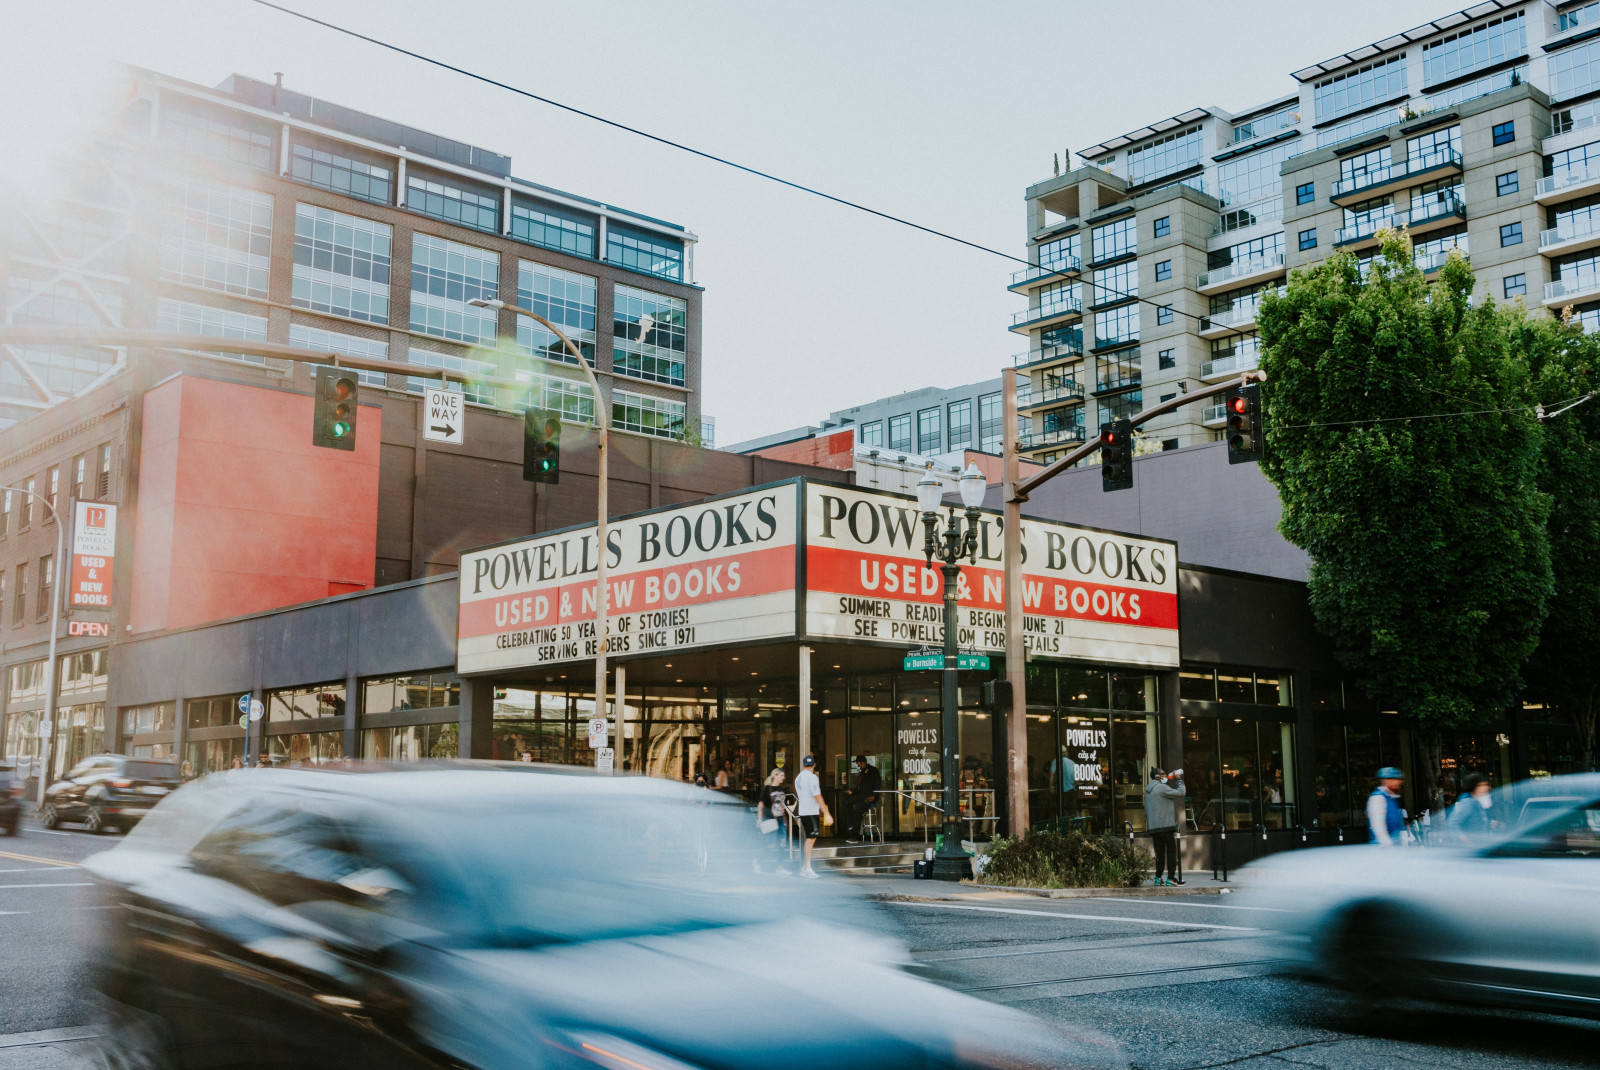 A red and white Powell's Books sign over a storefront in Portland, Oregon with cars passing by.